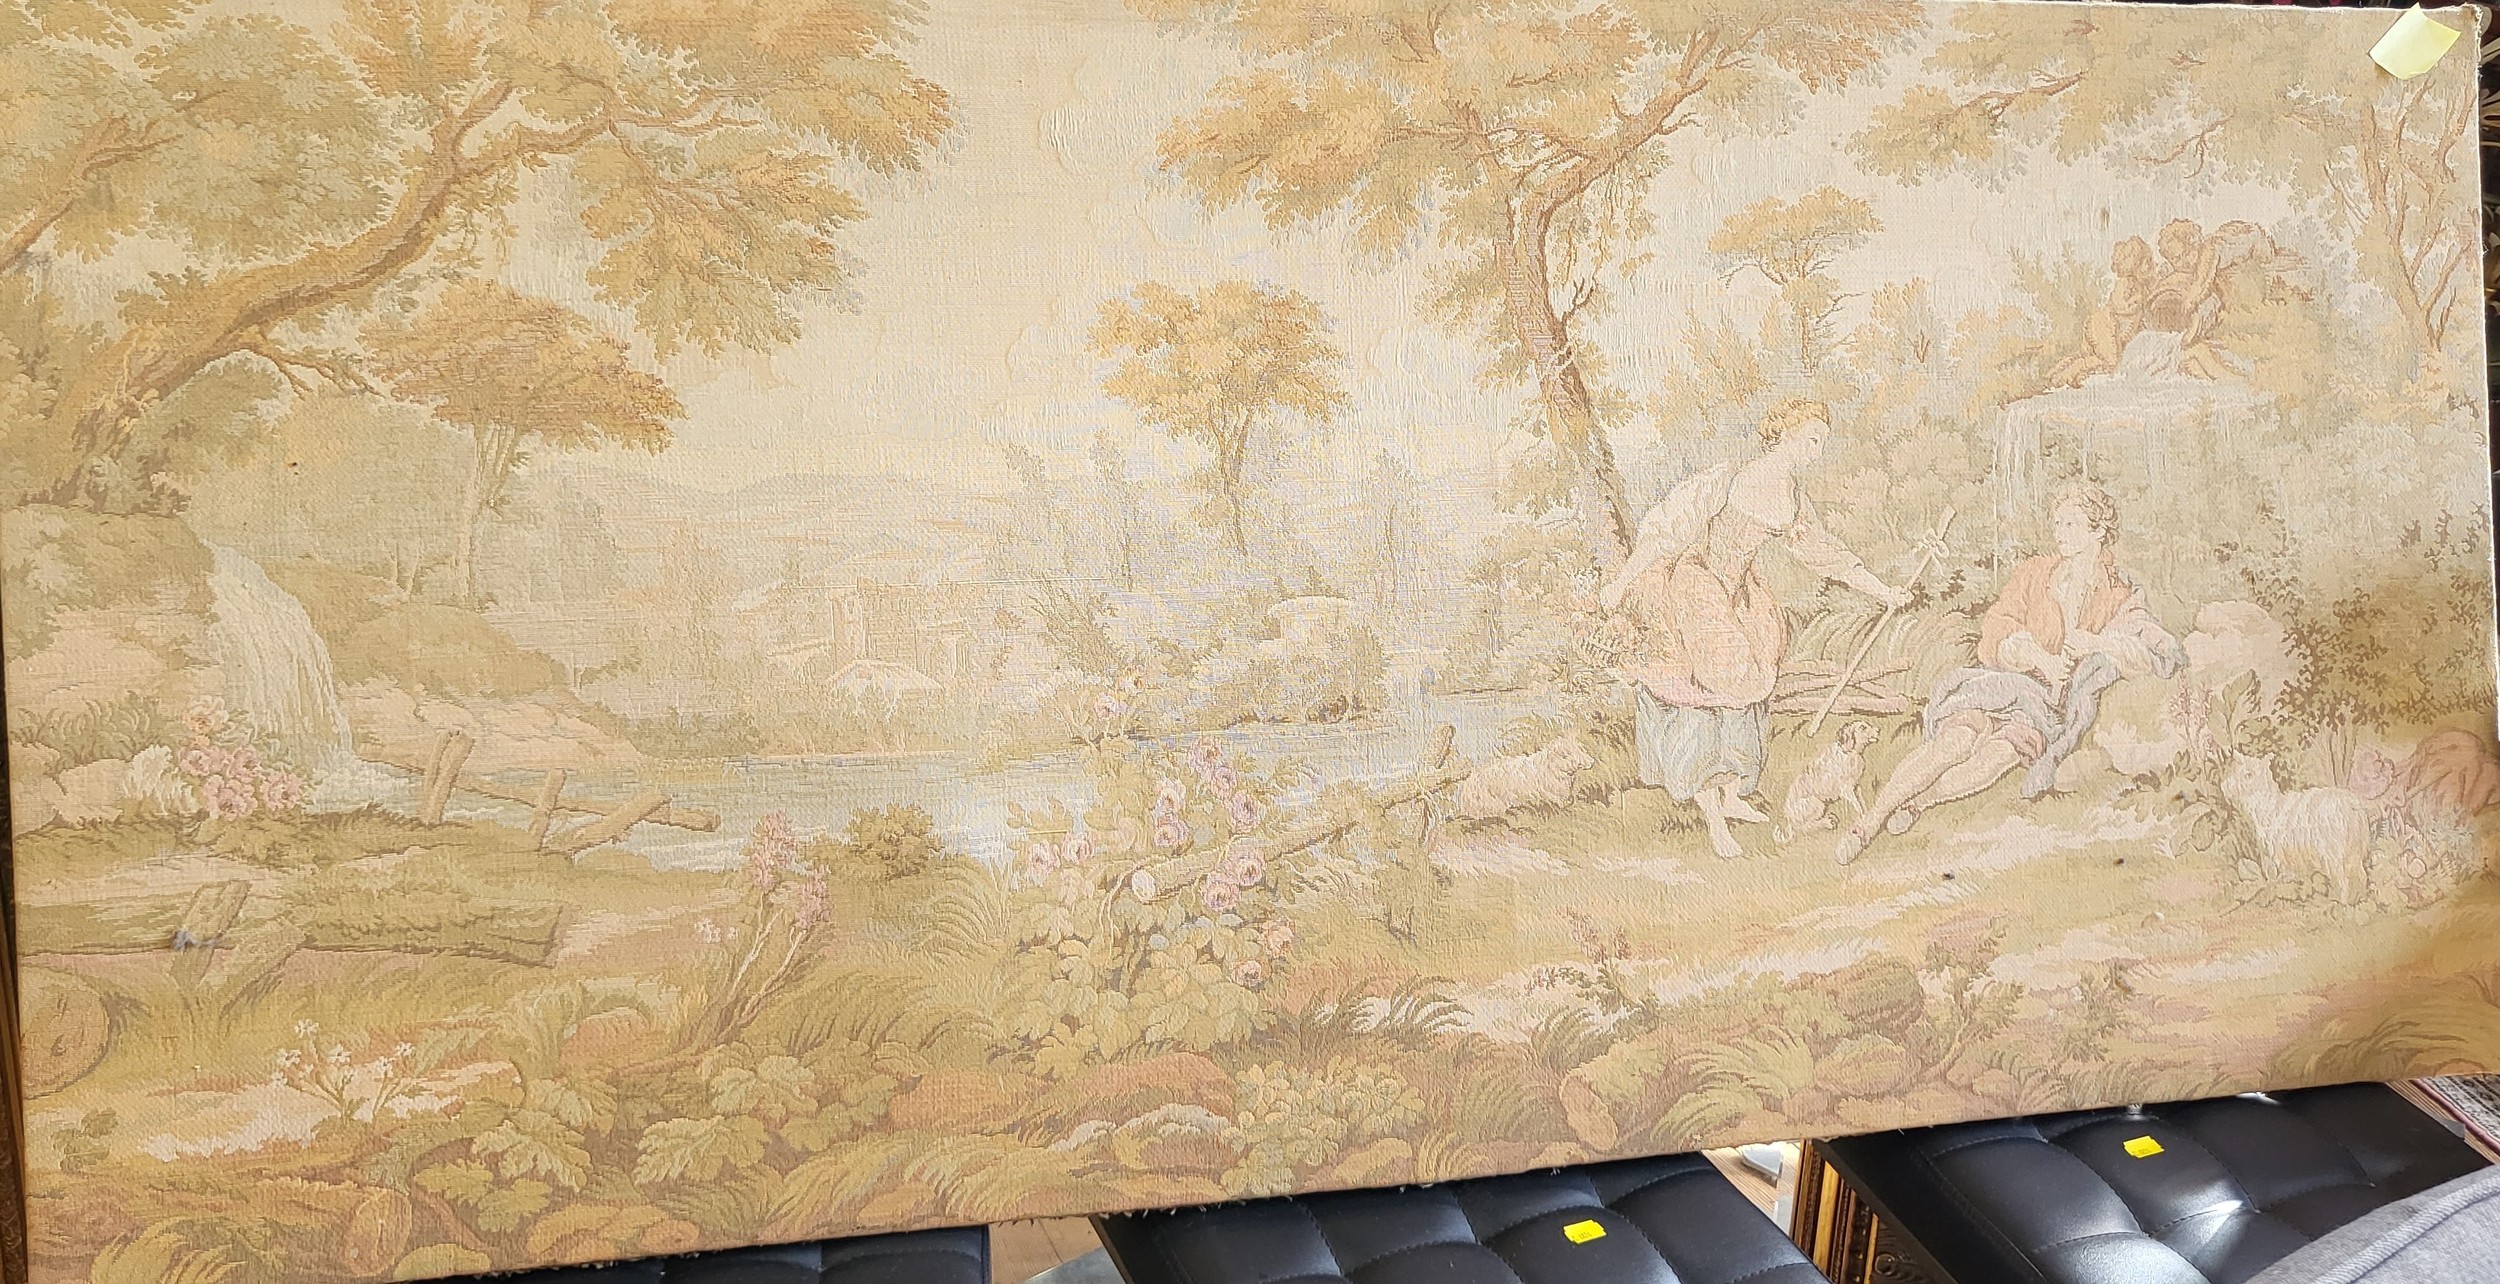 A modern tapestry in the antique style, depicting an idealistic scene of a couple beside a lake.